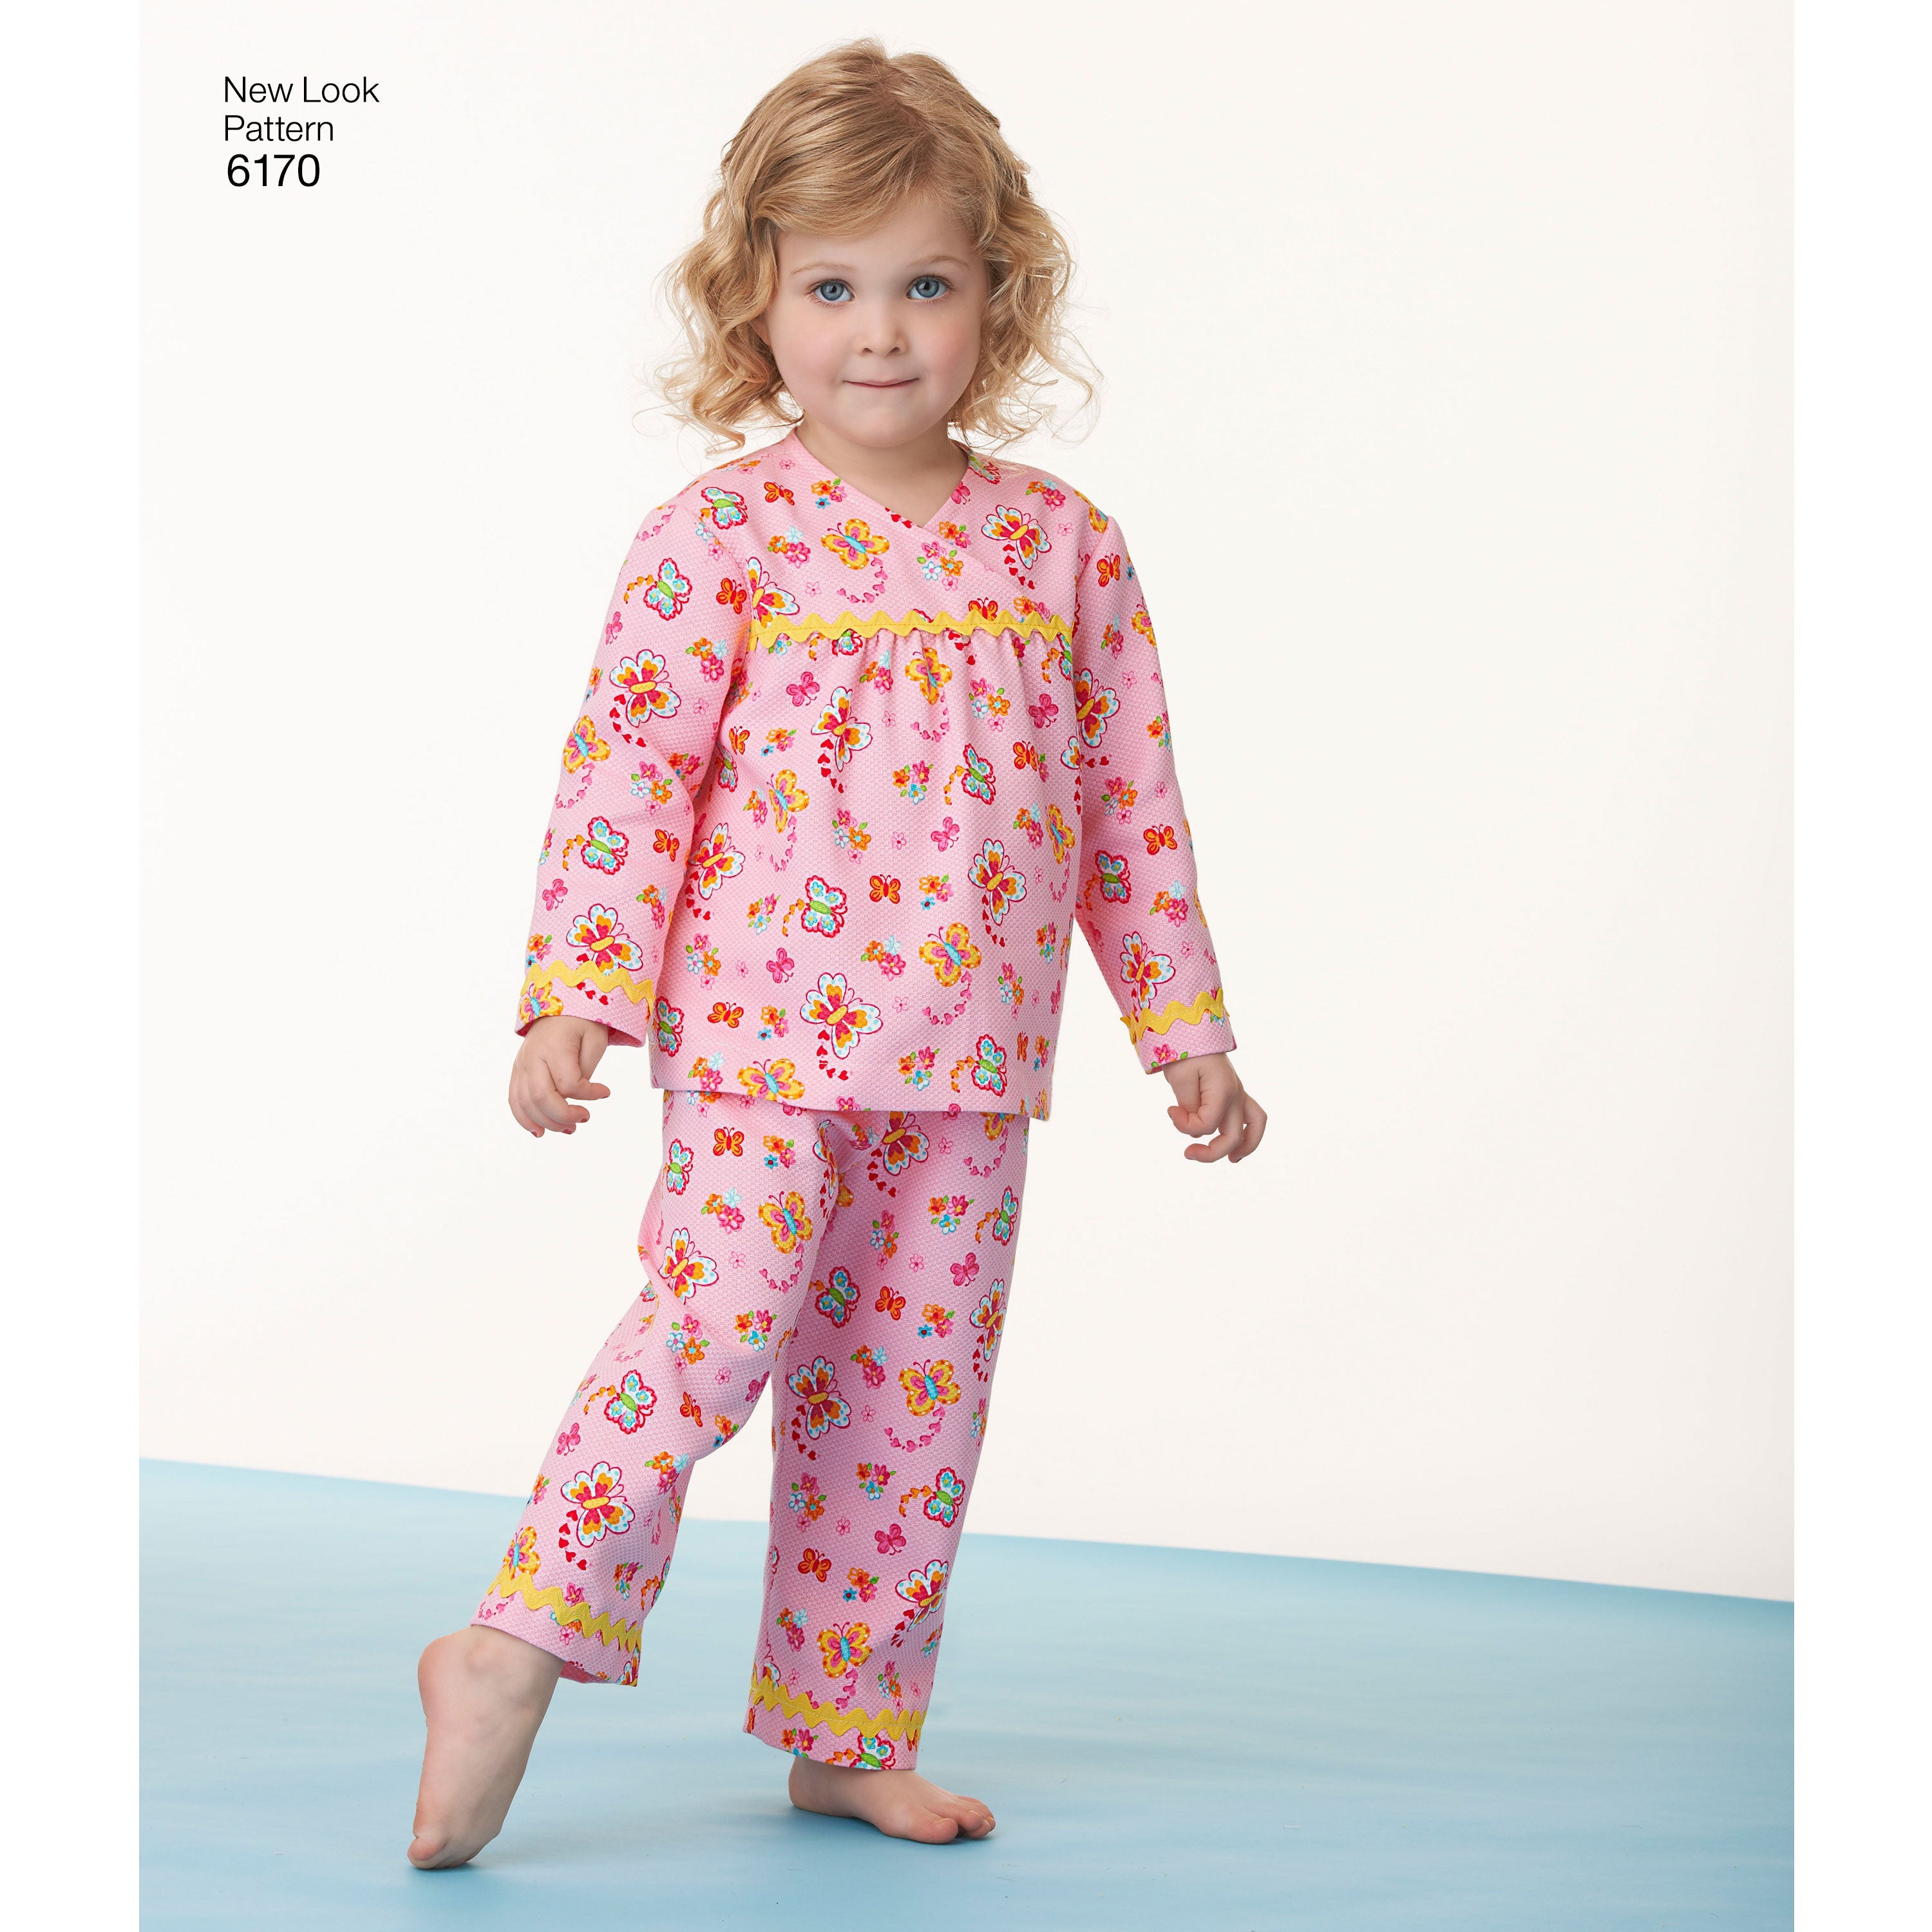 NL6170 Toddlers' and Child's Pyjamas pattern from Jaycotts Sewing Supplies